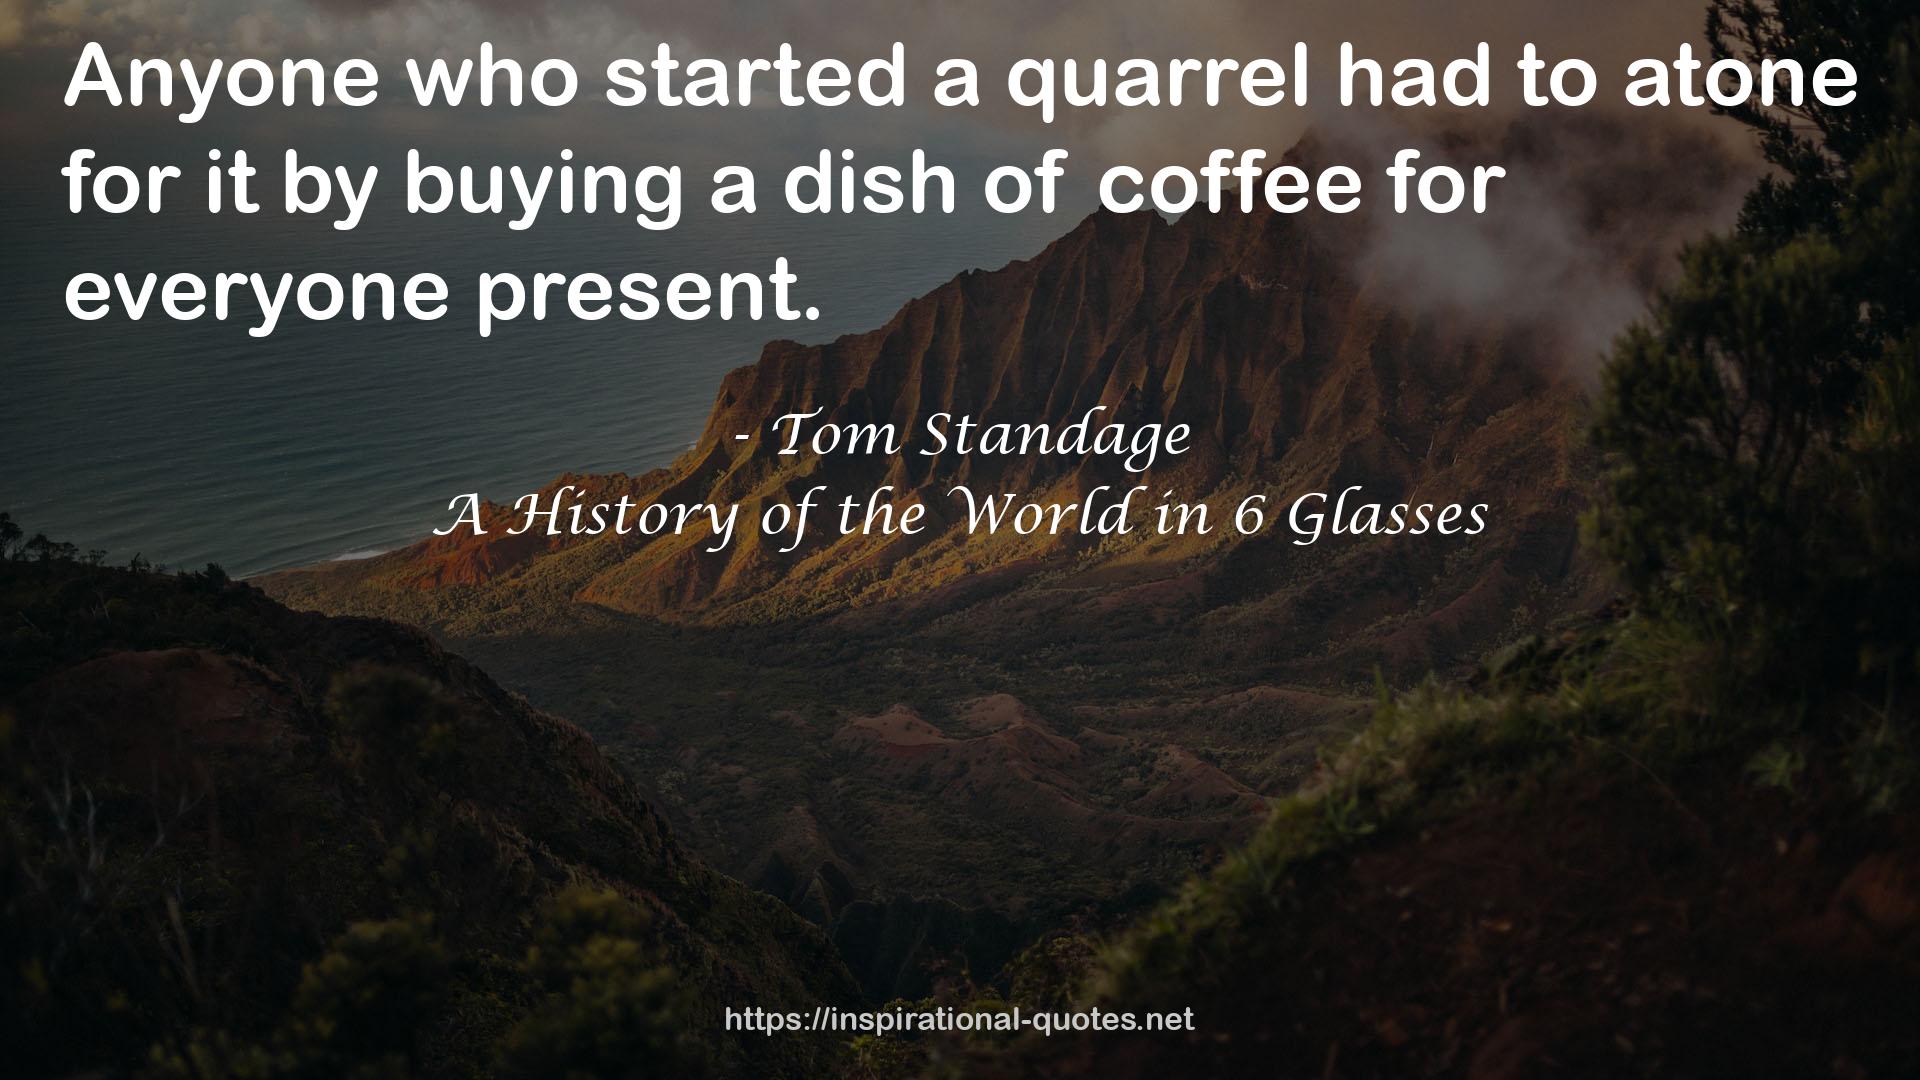 A History of the World in 6 Glasses QUOTES